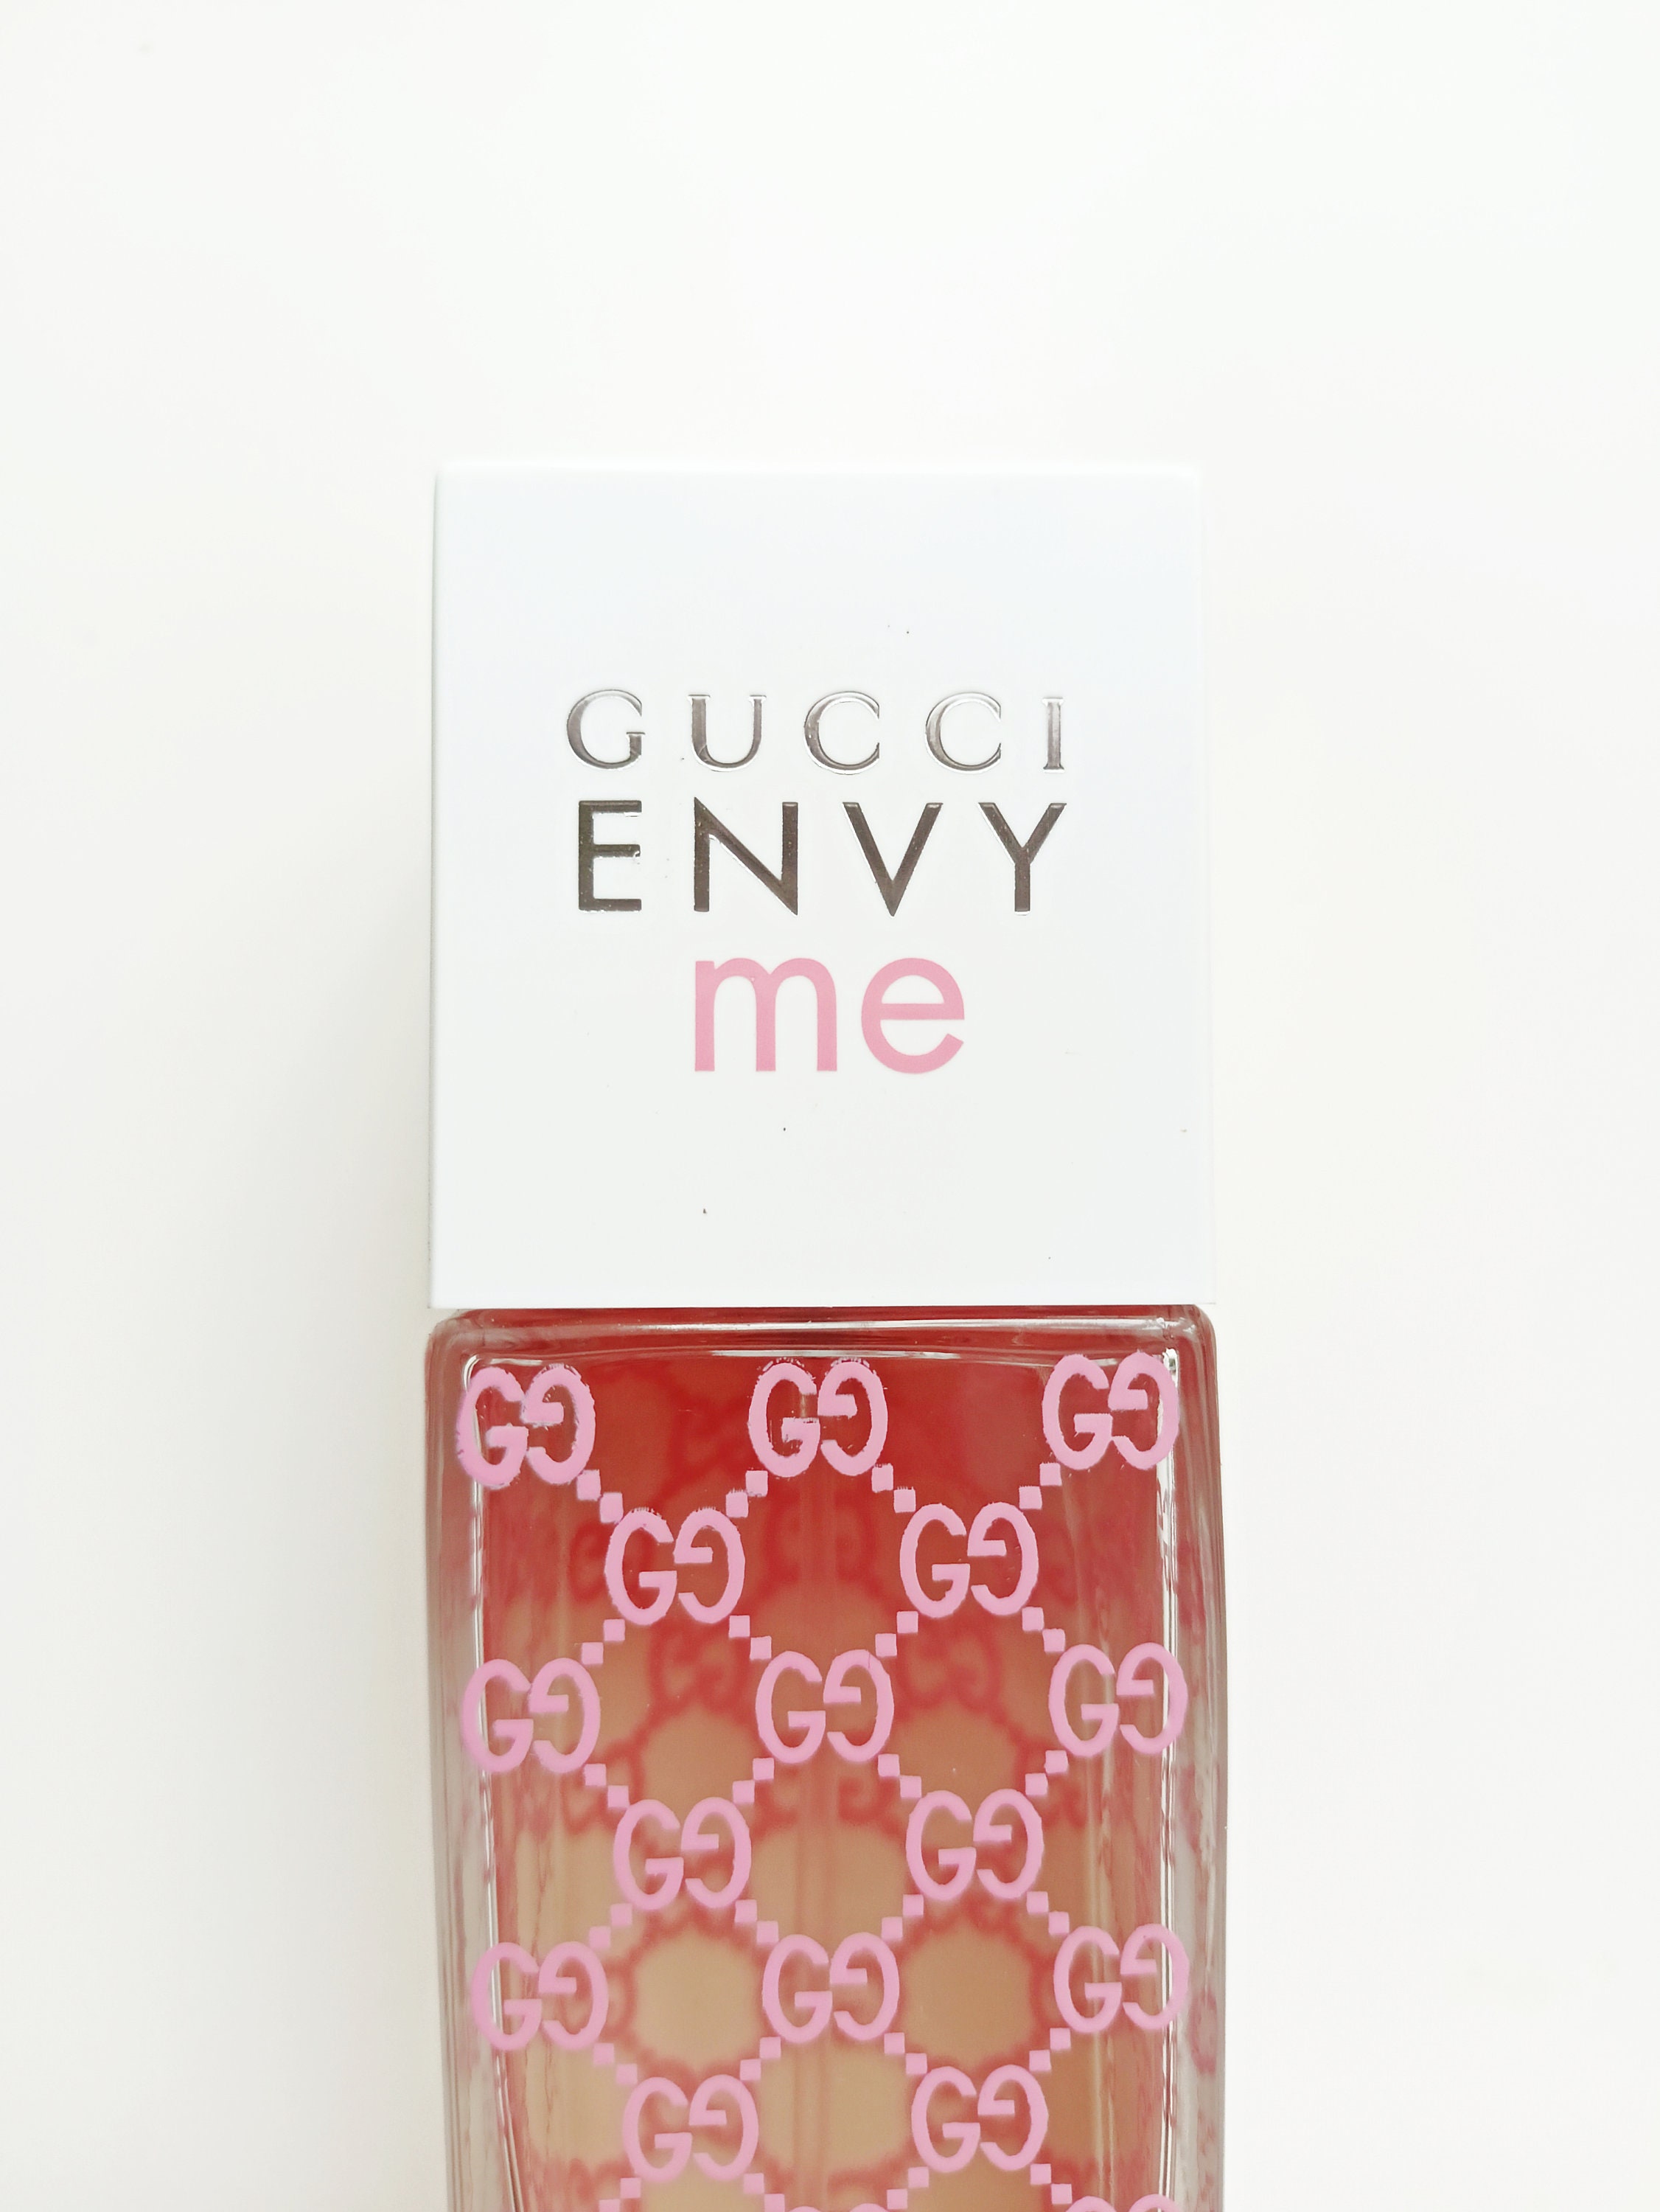 Discontinued Perfume Samples Gucci Envy Me Vintage Fall - Etsy